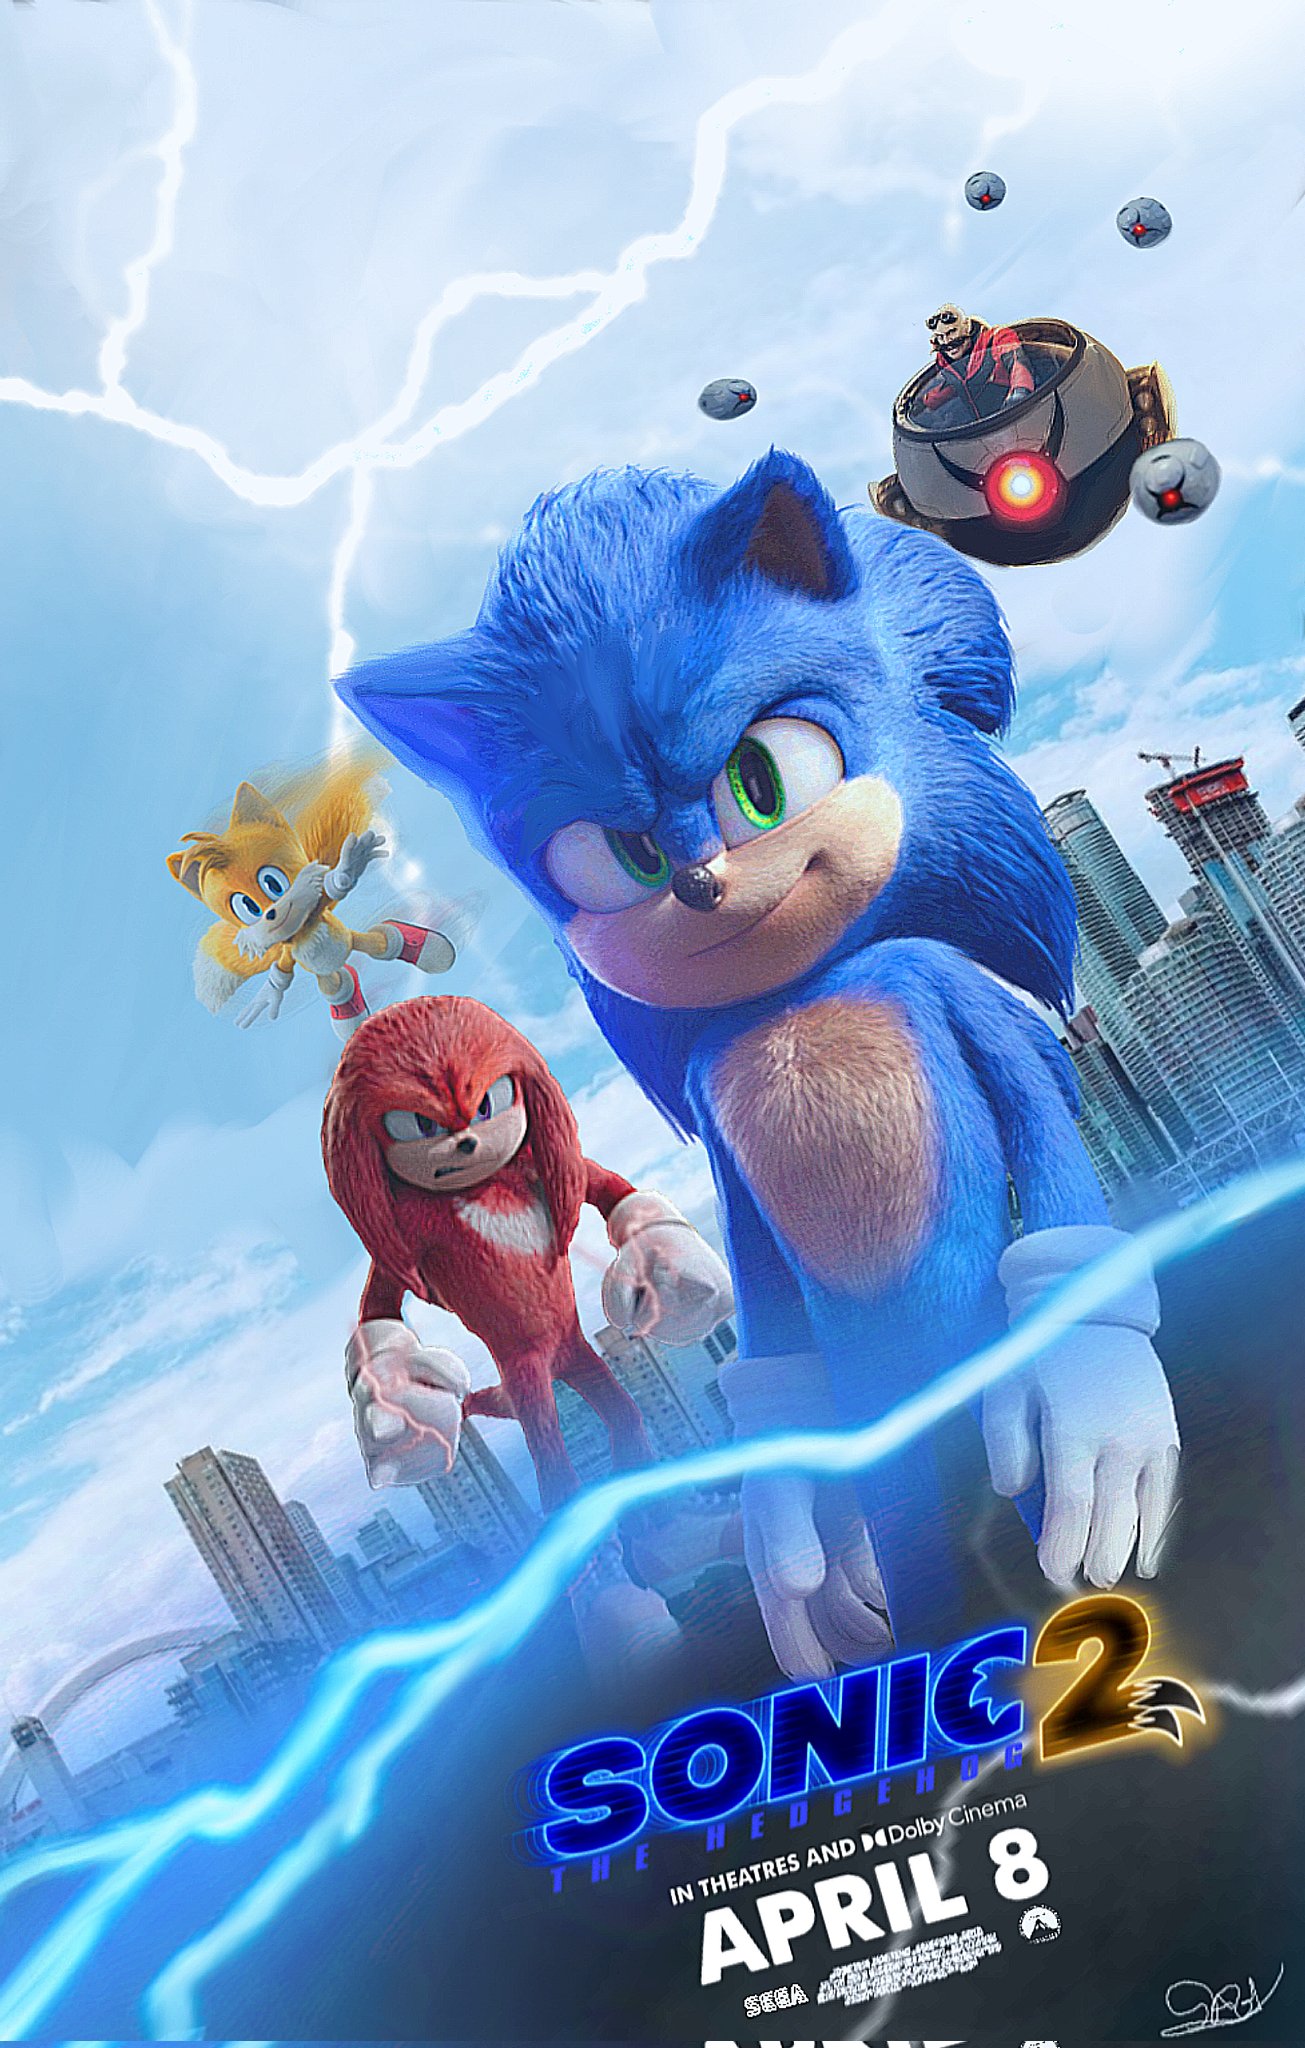 Sag on X: THE ULTIMATE LIFE FORM 👹. #SonicMovie #SonicMovie2